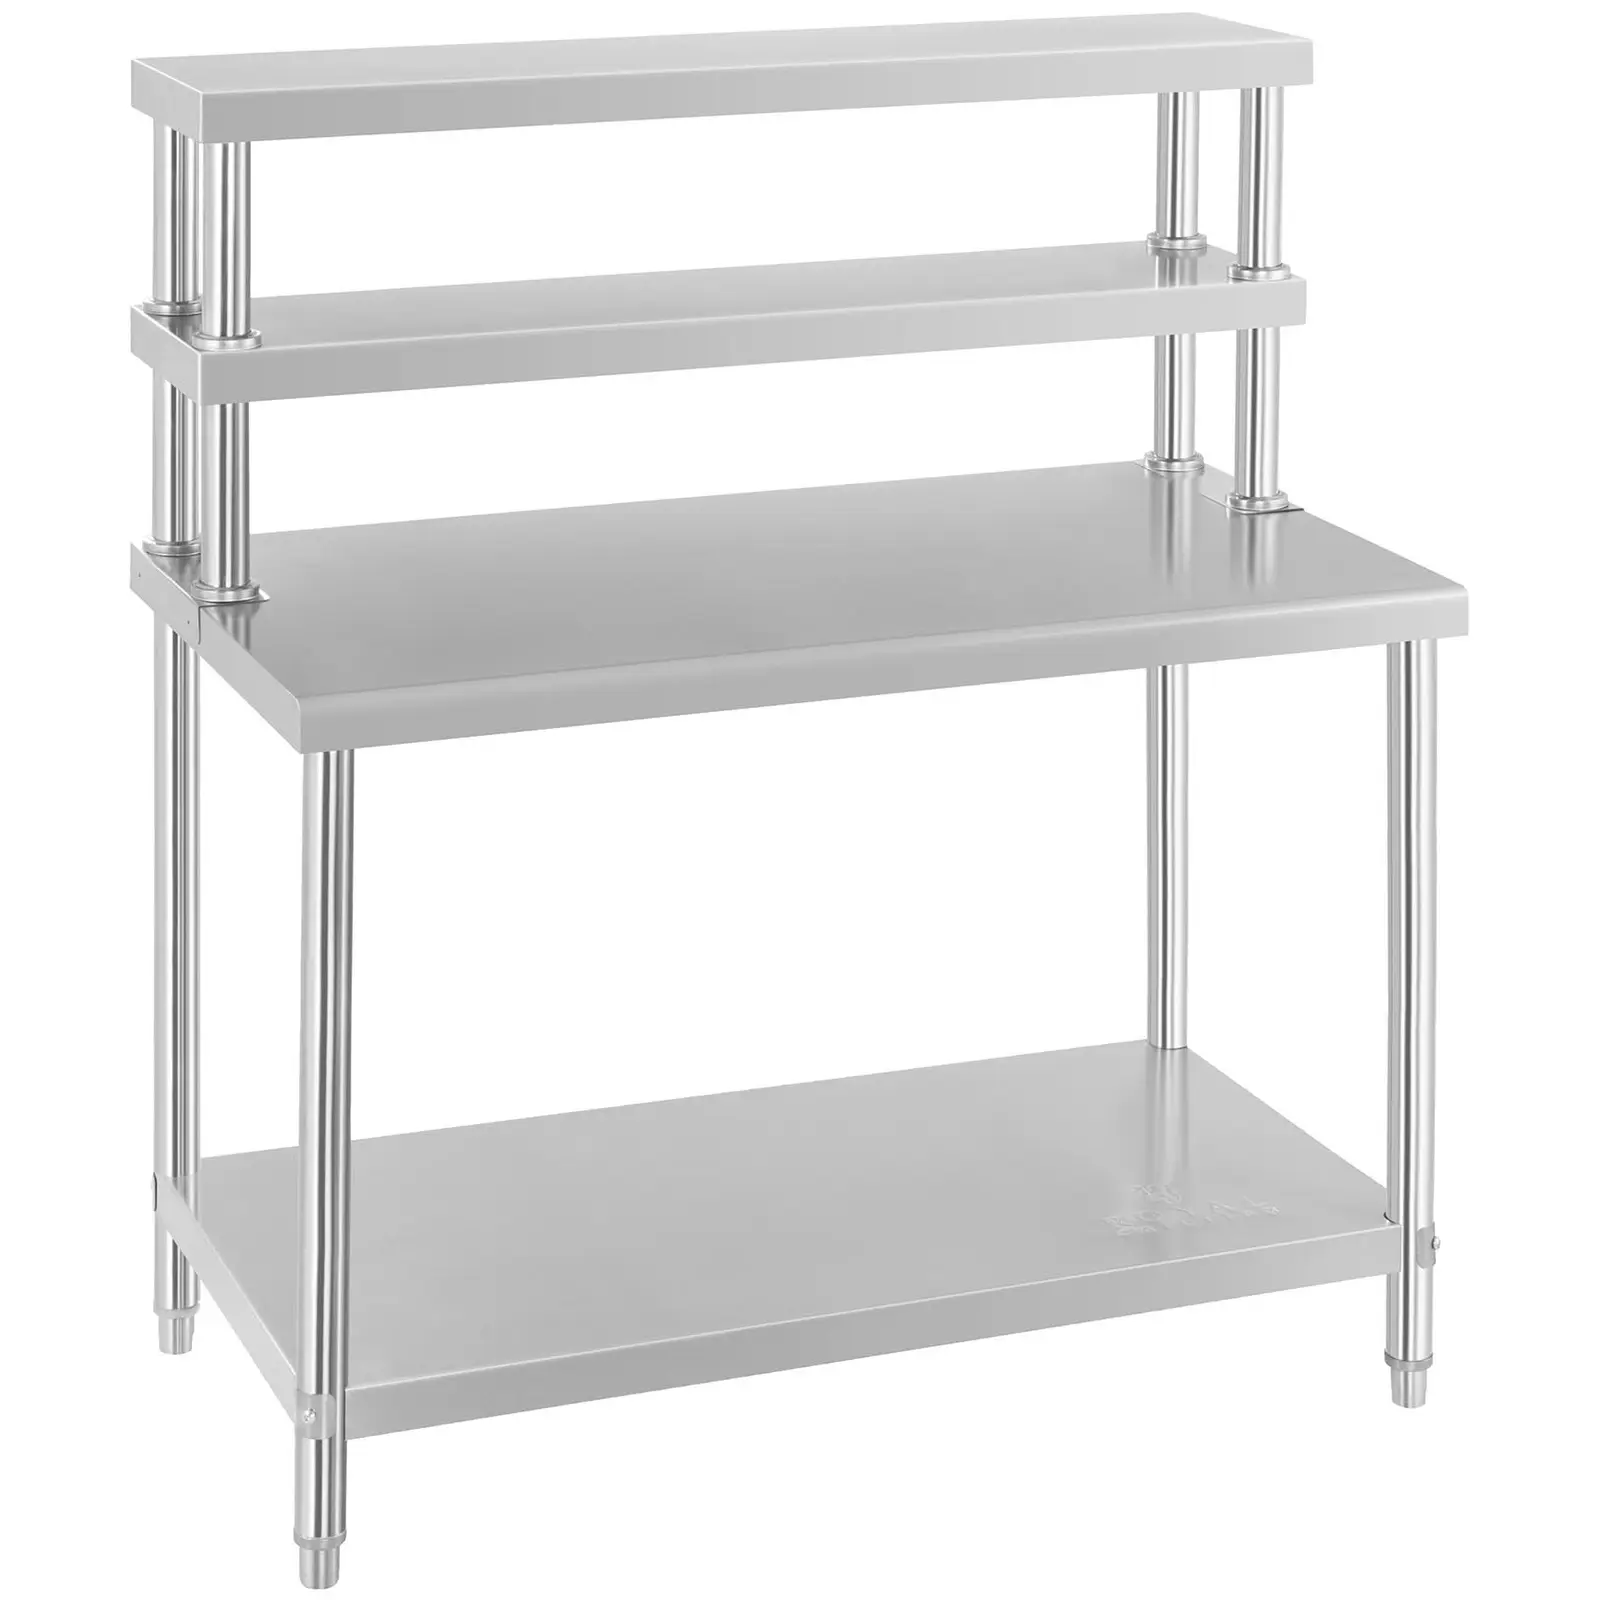 Stainless Steel Work Table with Overshelf - 2er - 175 kg loading capacity